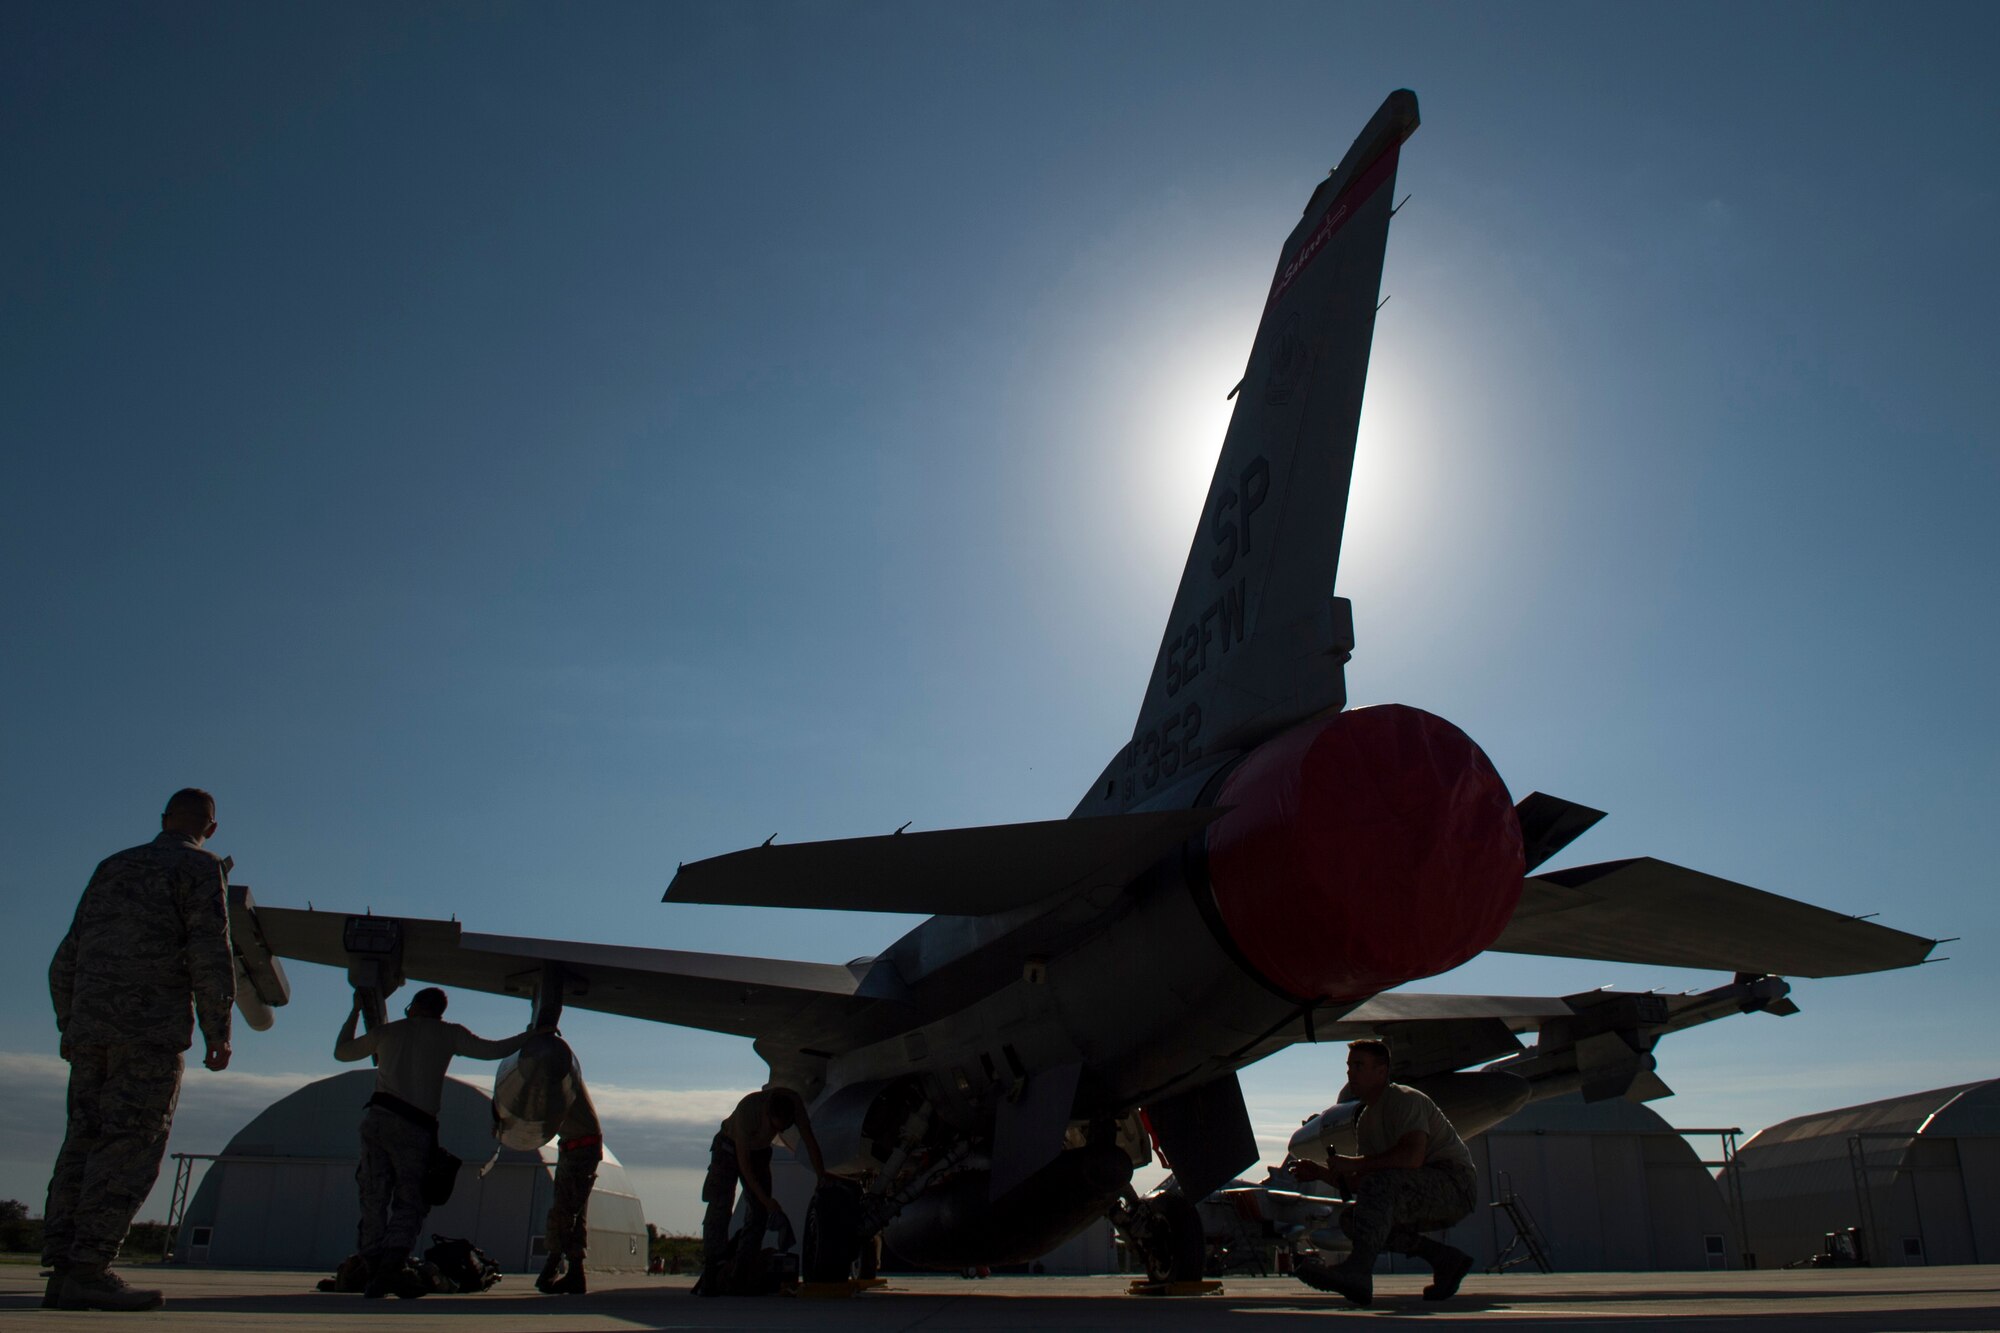 TRAPANI AIR BASE, Italy - An F-16 Fighting Falcon fighter aircraft assigned to the 480th Fighter Squadron, Spangdahlem Air Base, Germany, is prepared by 52nd Aircraft Maintenance Squadron Airmen before the start of the Trapani Air Show at Trapani Air Base, Italy, Oct. 17, 2015. Six maintenance Airmen provided support for the two F-16s participating in the air show. The Trapani Air Show kicked off Exercise Trident Juncture 15, a multiservice, multinational training exercise involving more than 30 Allied and Partner Nations taking place throughout Italy, Spain and Portugal. (U.S. Air Force photo by Airman 1st Class Luke Kitterman/Released)